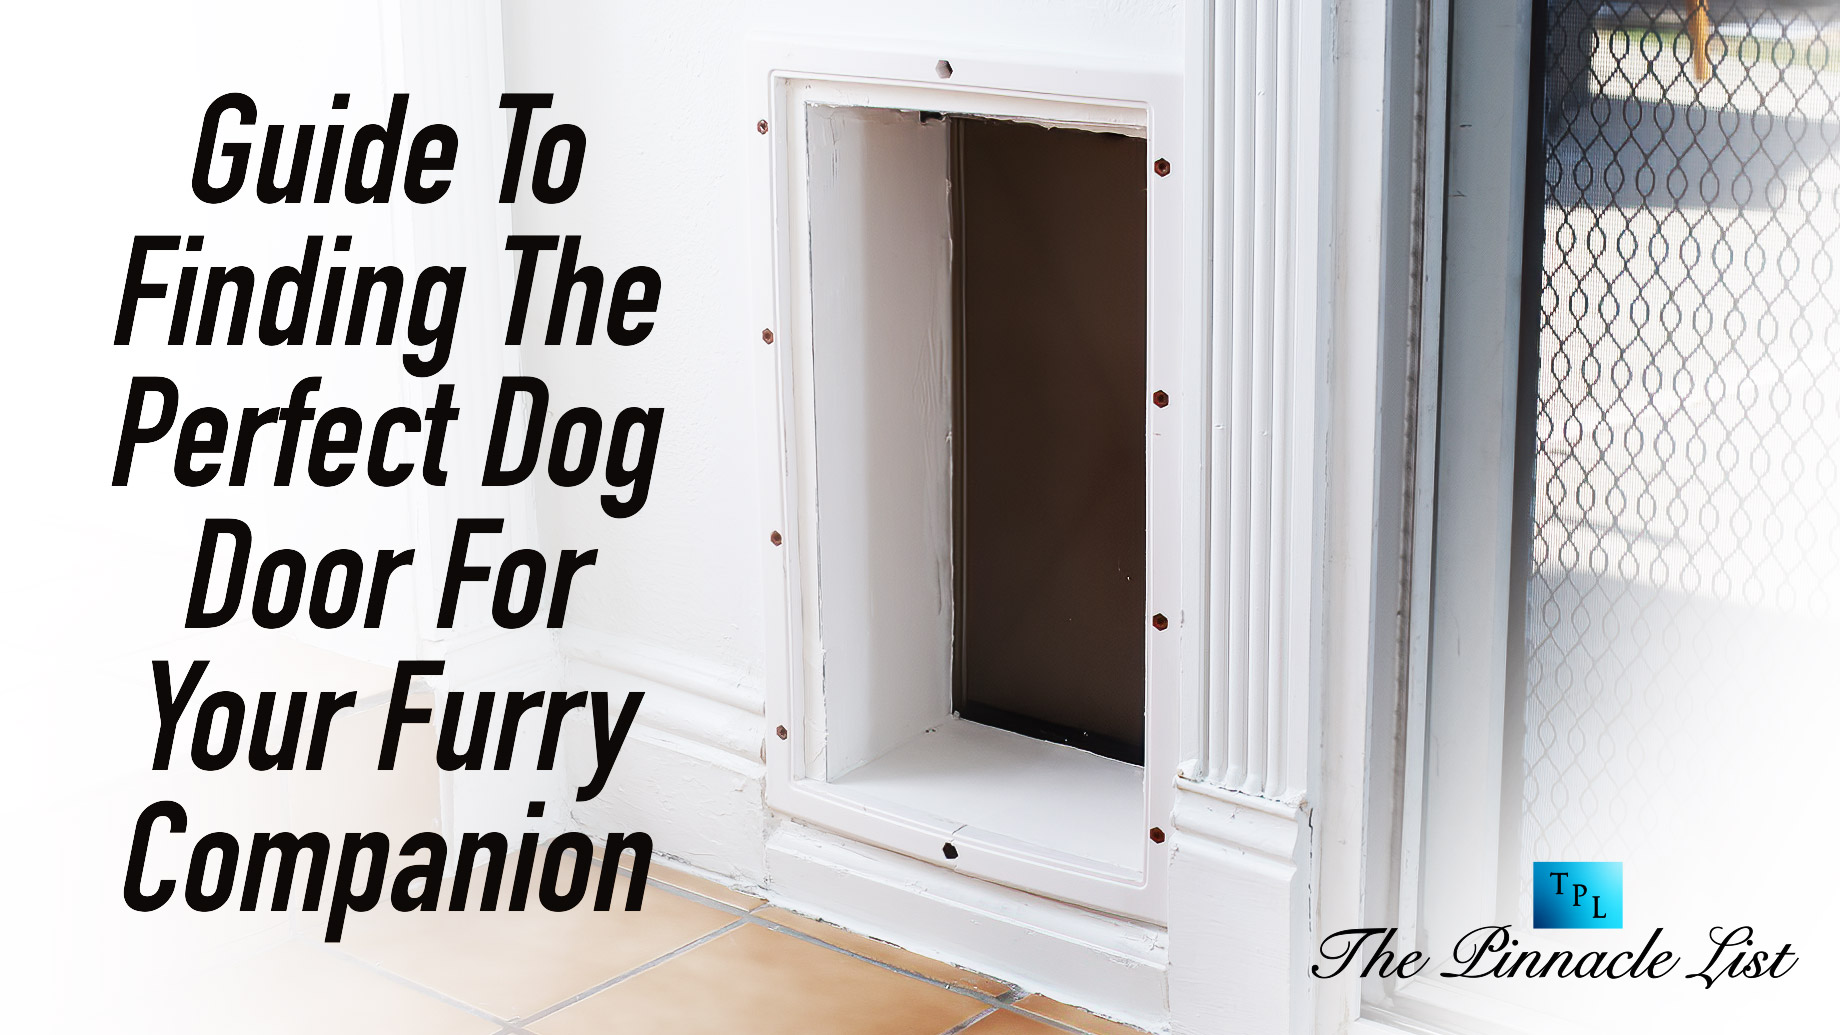 Guide To Finding The Perfect Dog Door For Your Furry Companion